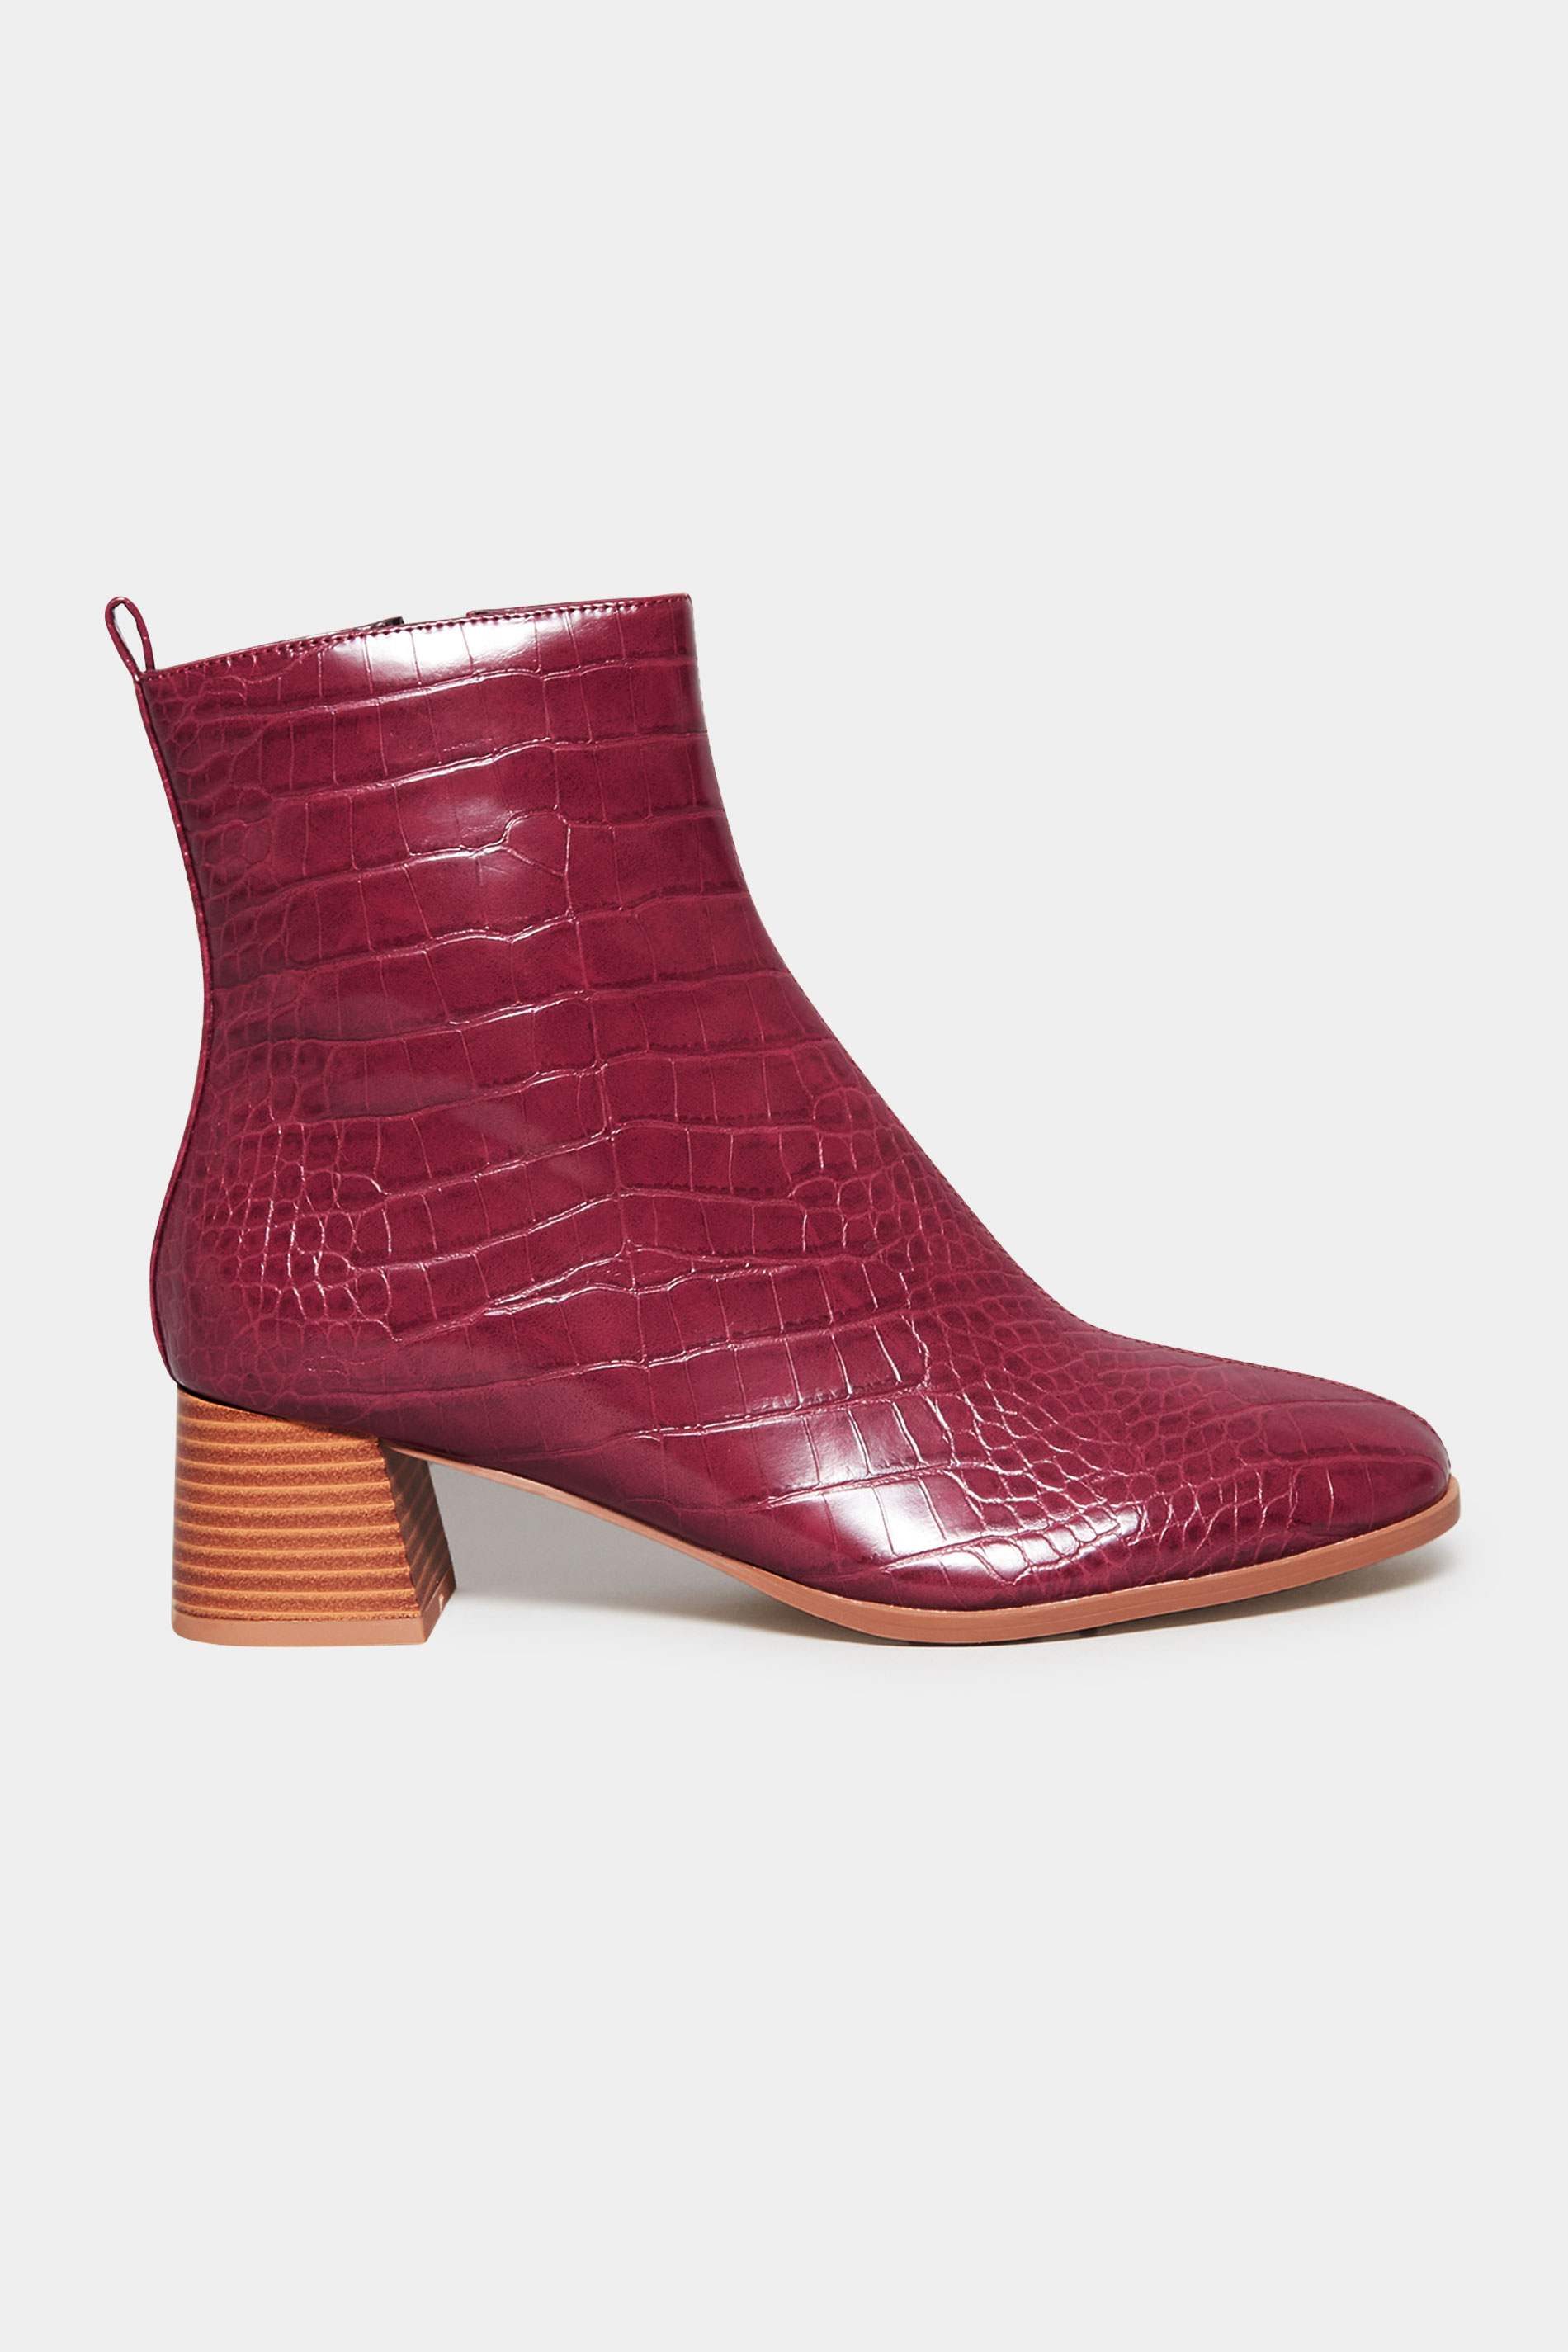 LTS Wine Red Croc Block Heel Boots In Standard Fit | Long Tall Sally